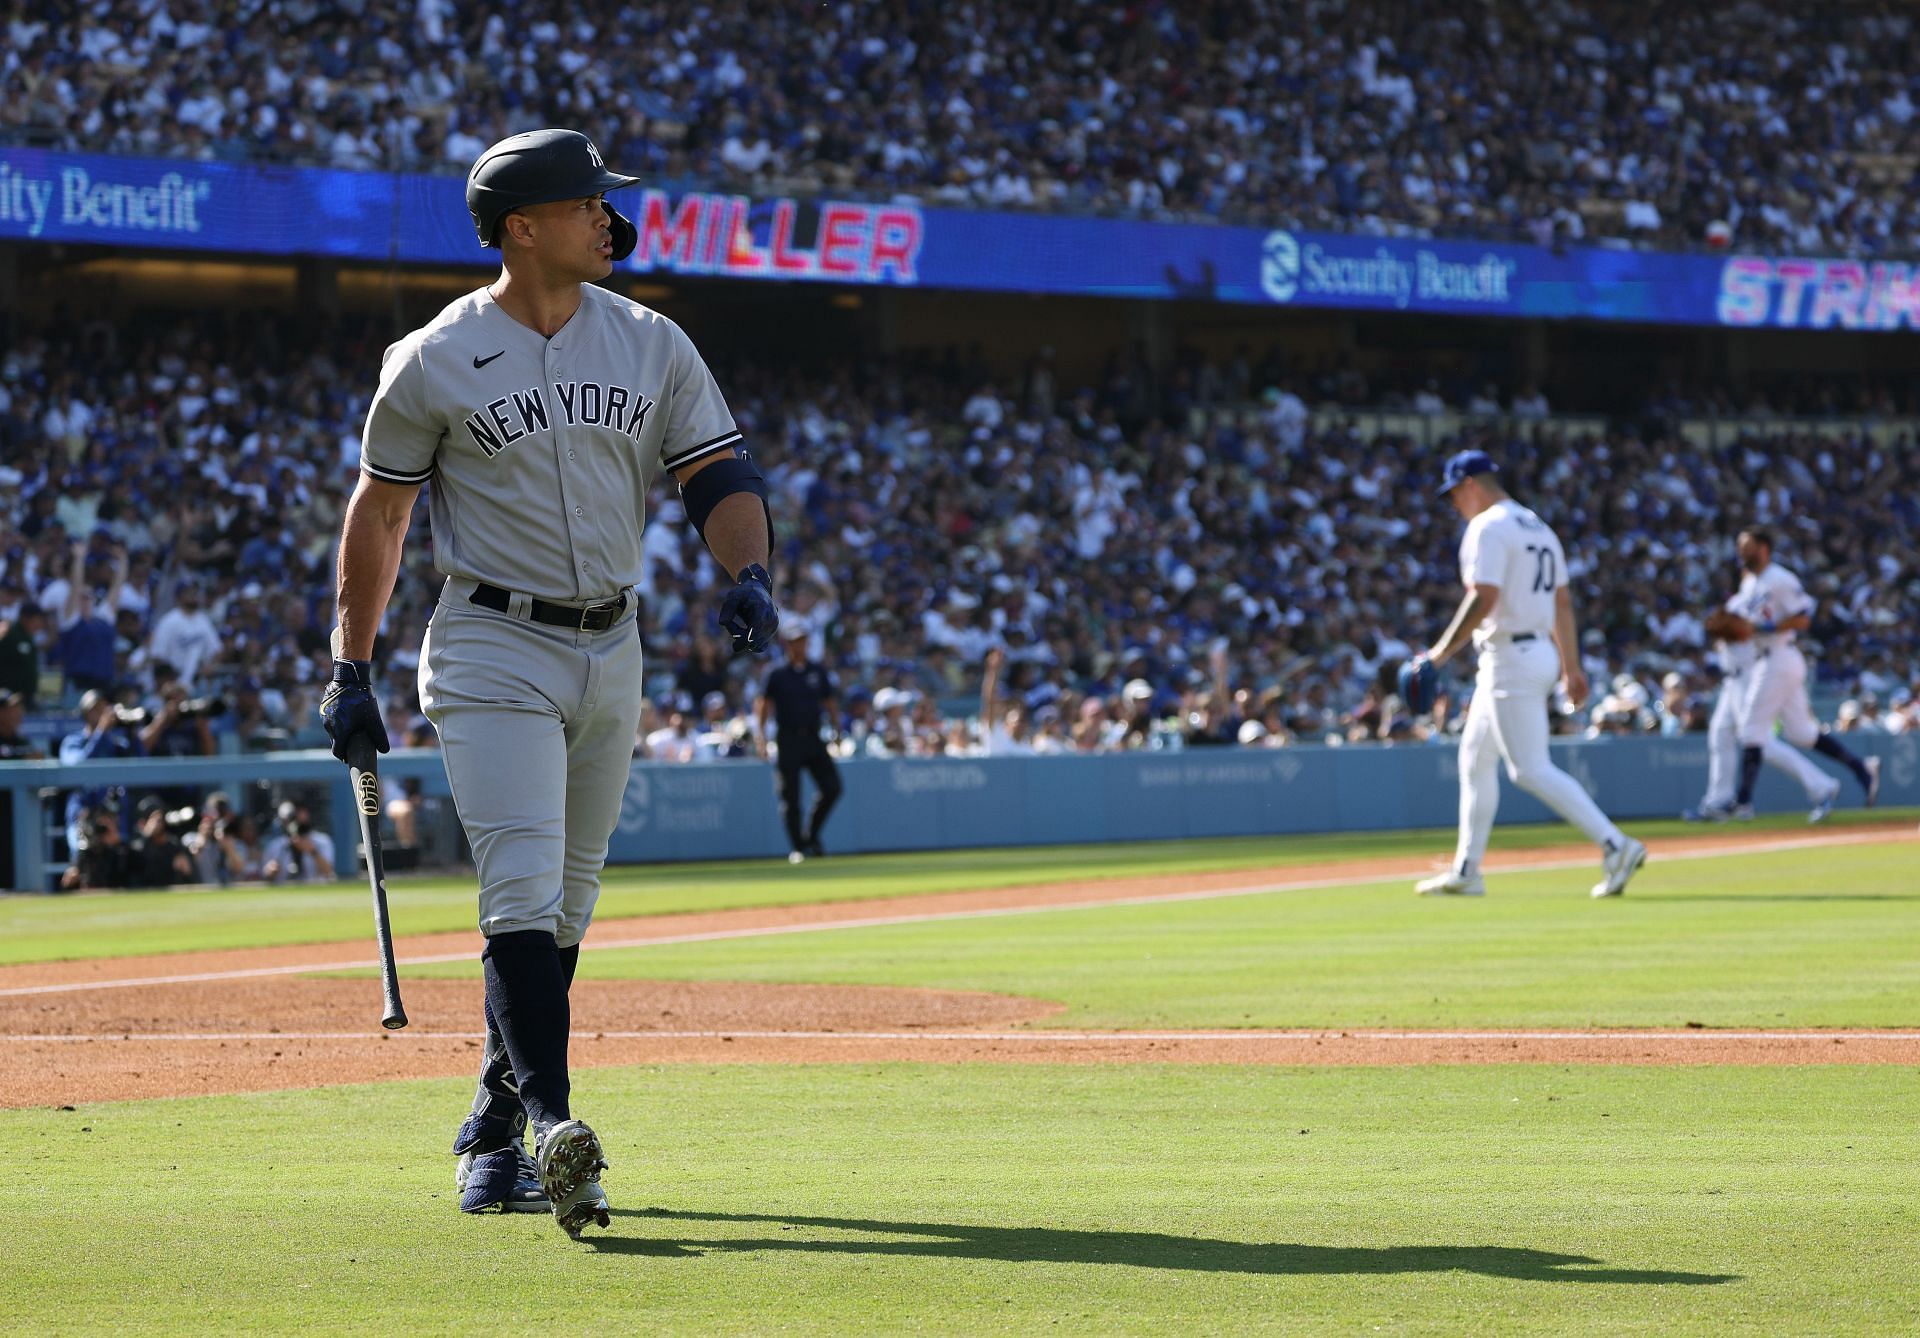 New York Yankees fans frustrated as Josh Donaldson bobbles easy grounder  leading to huge deficit against Boston Red Sox: Dude is beyond washed